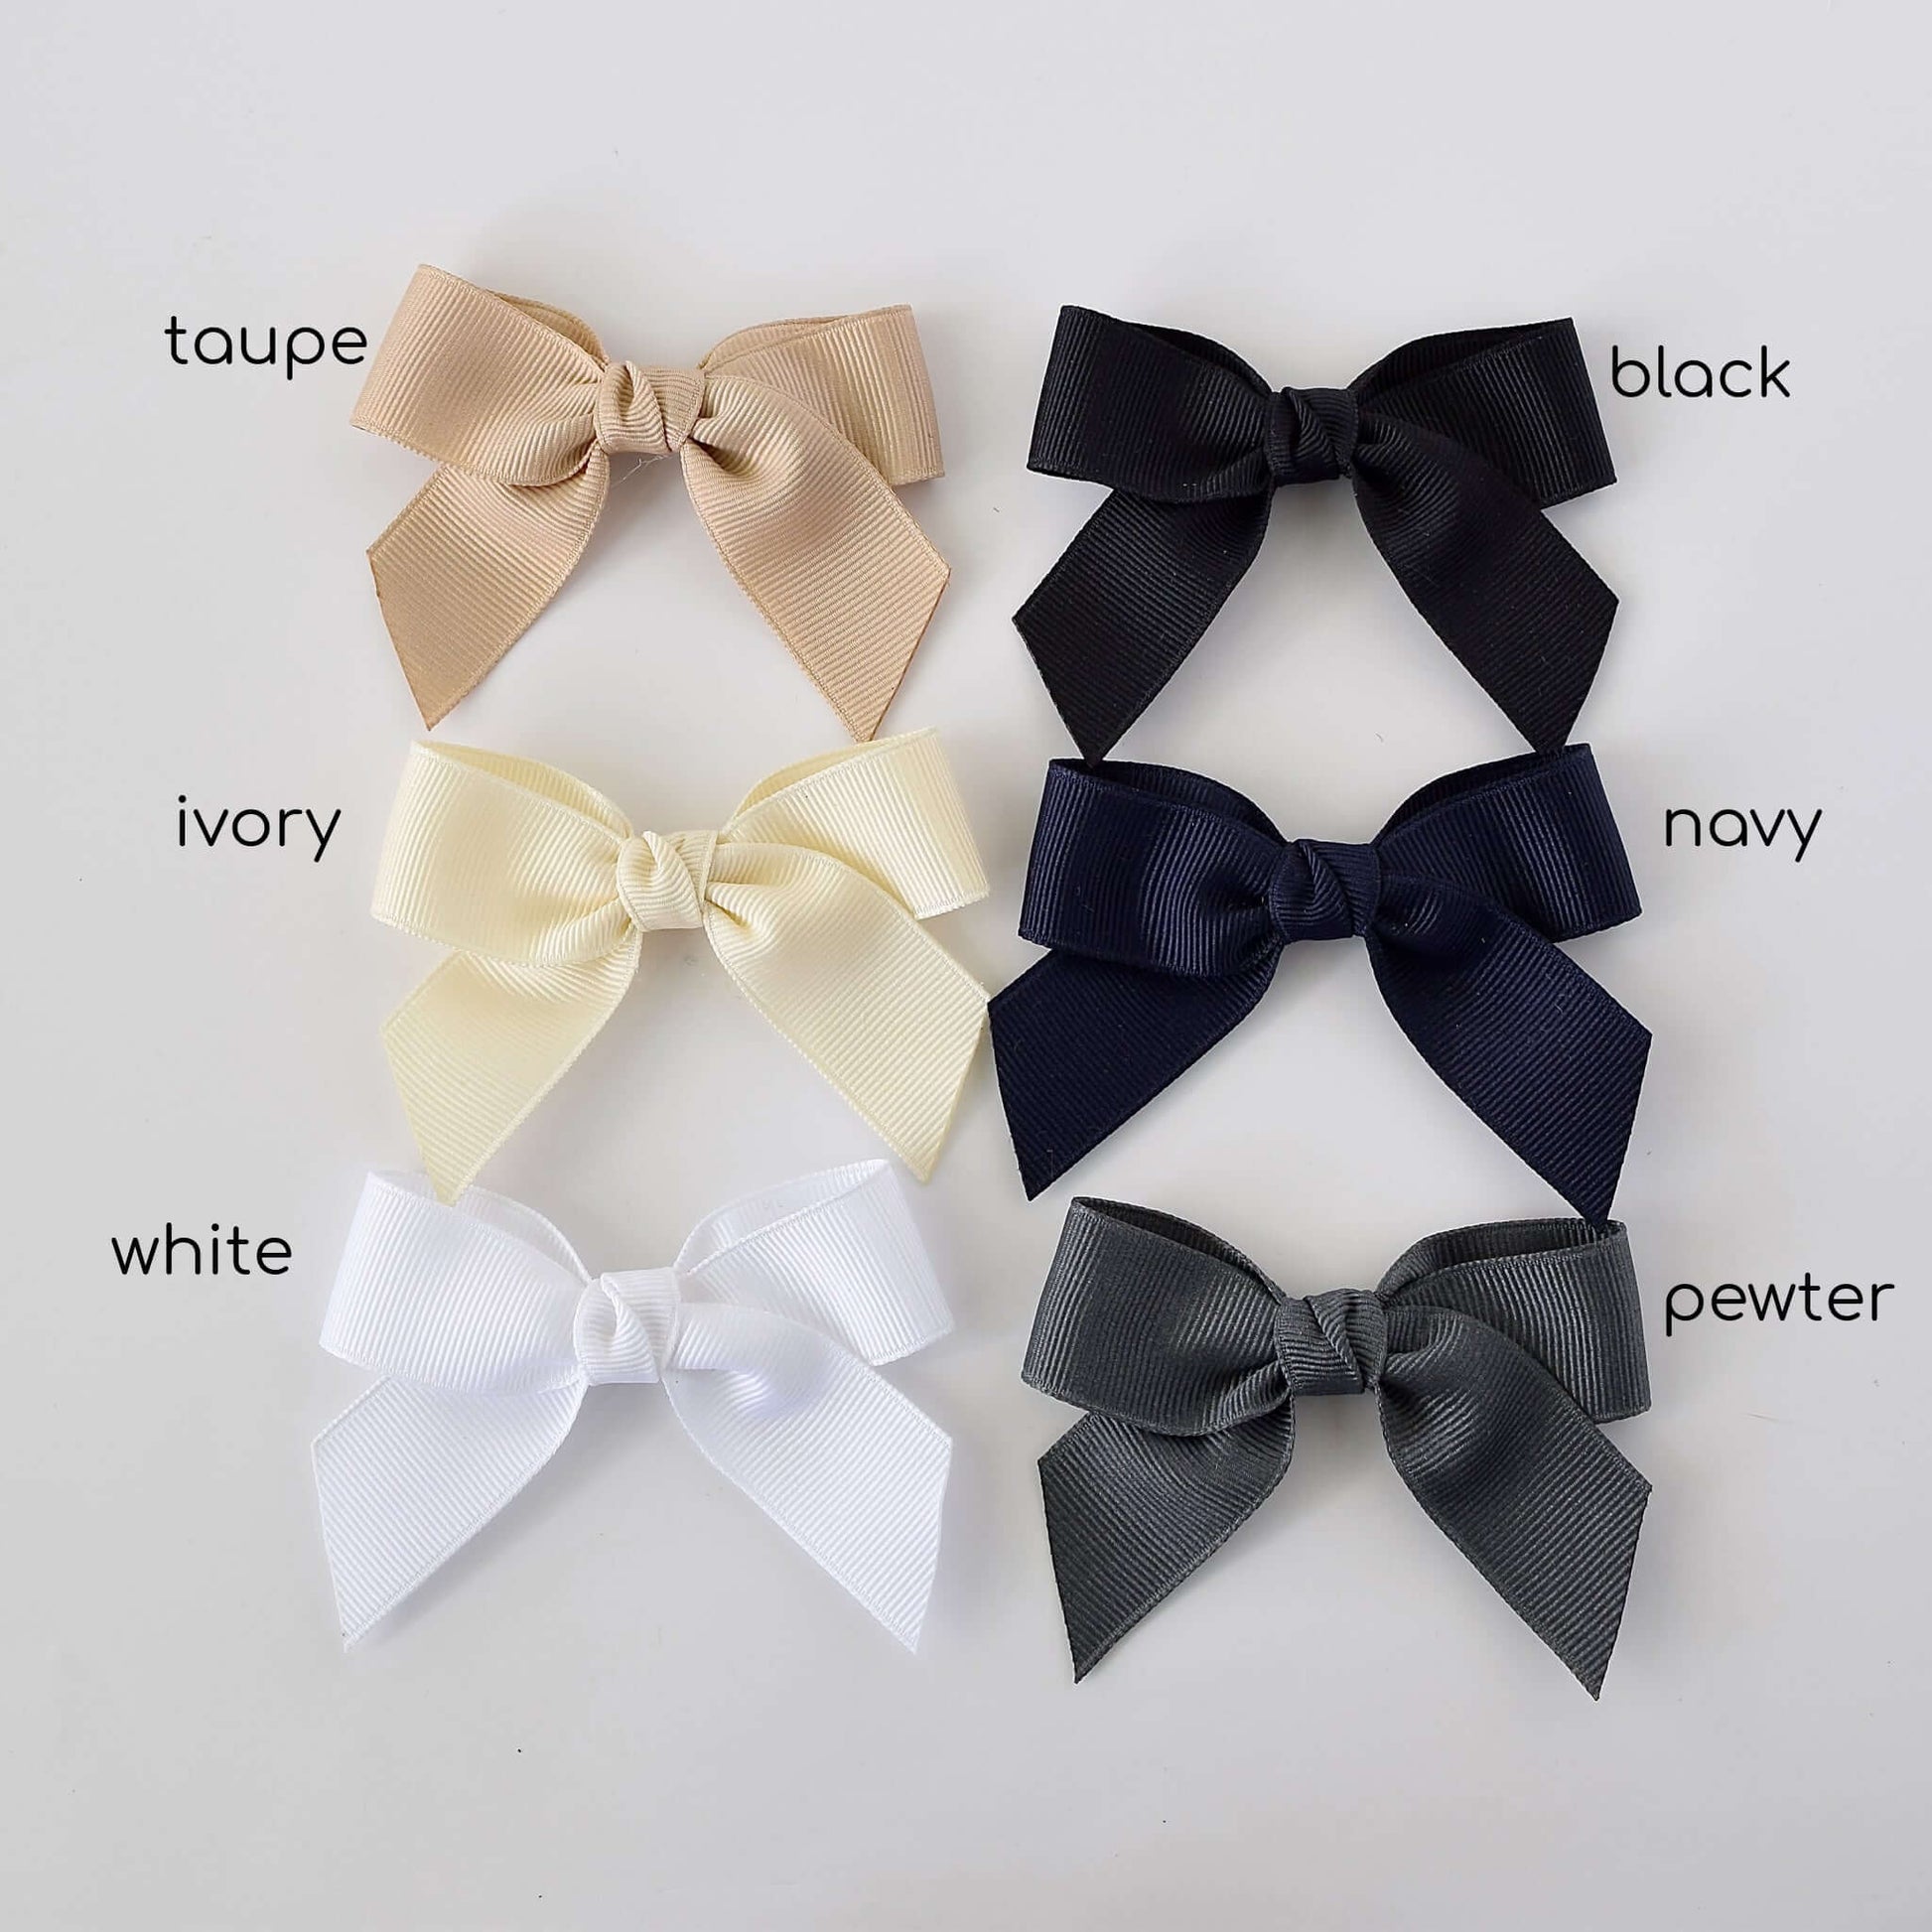 Six 3-inch grosgrain sailor bow clips in taupe, black, ivory, navy, white, and pewter colors arranged in two rows.